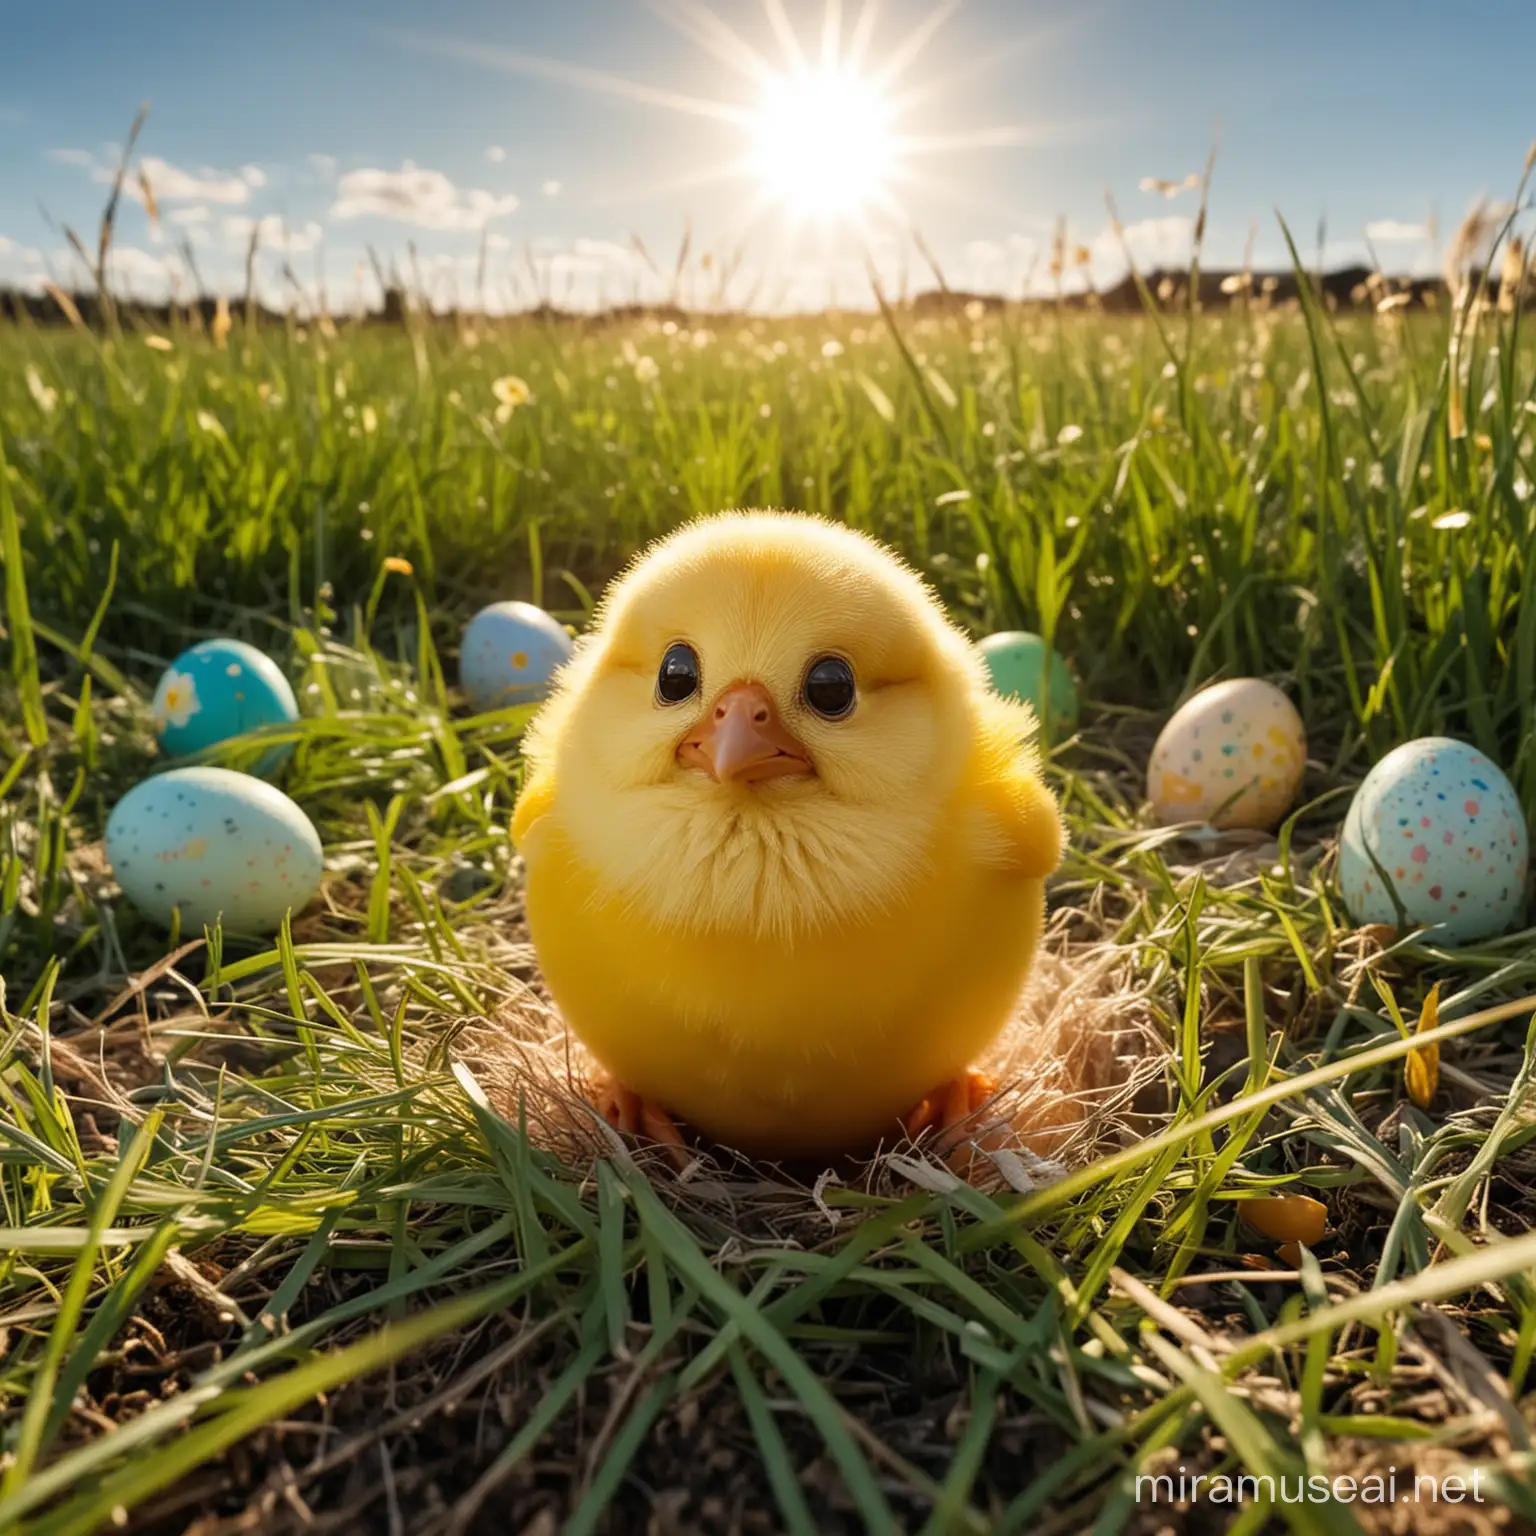 weird chick hatching out of easter egg. In a grass field under the sun